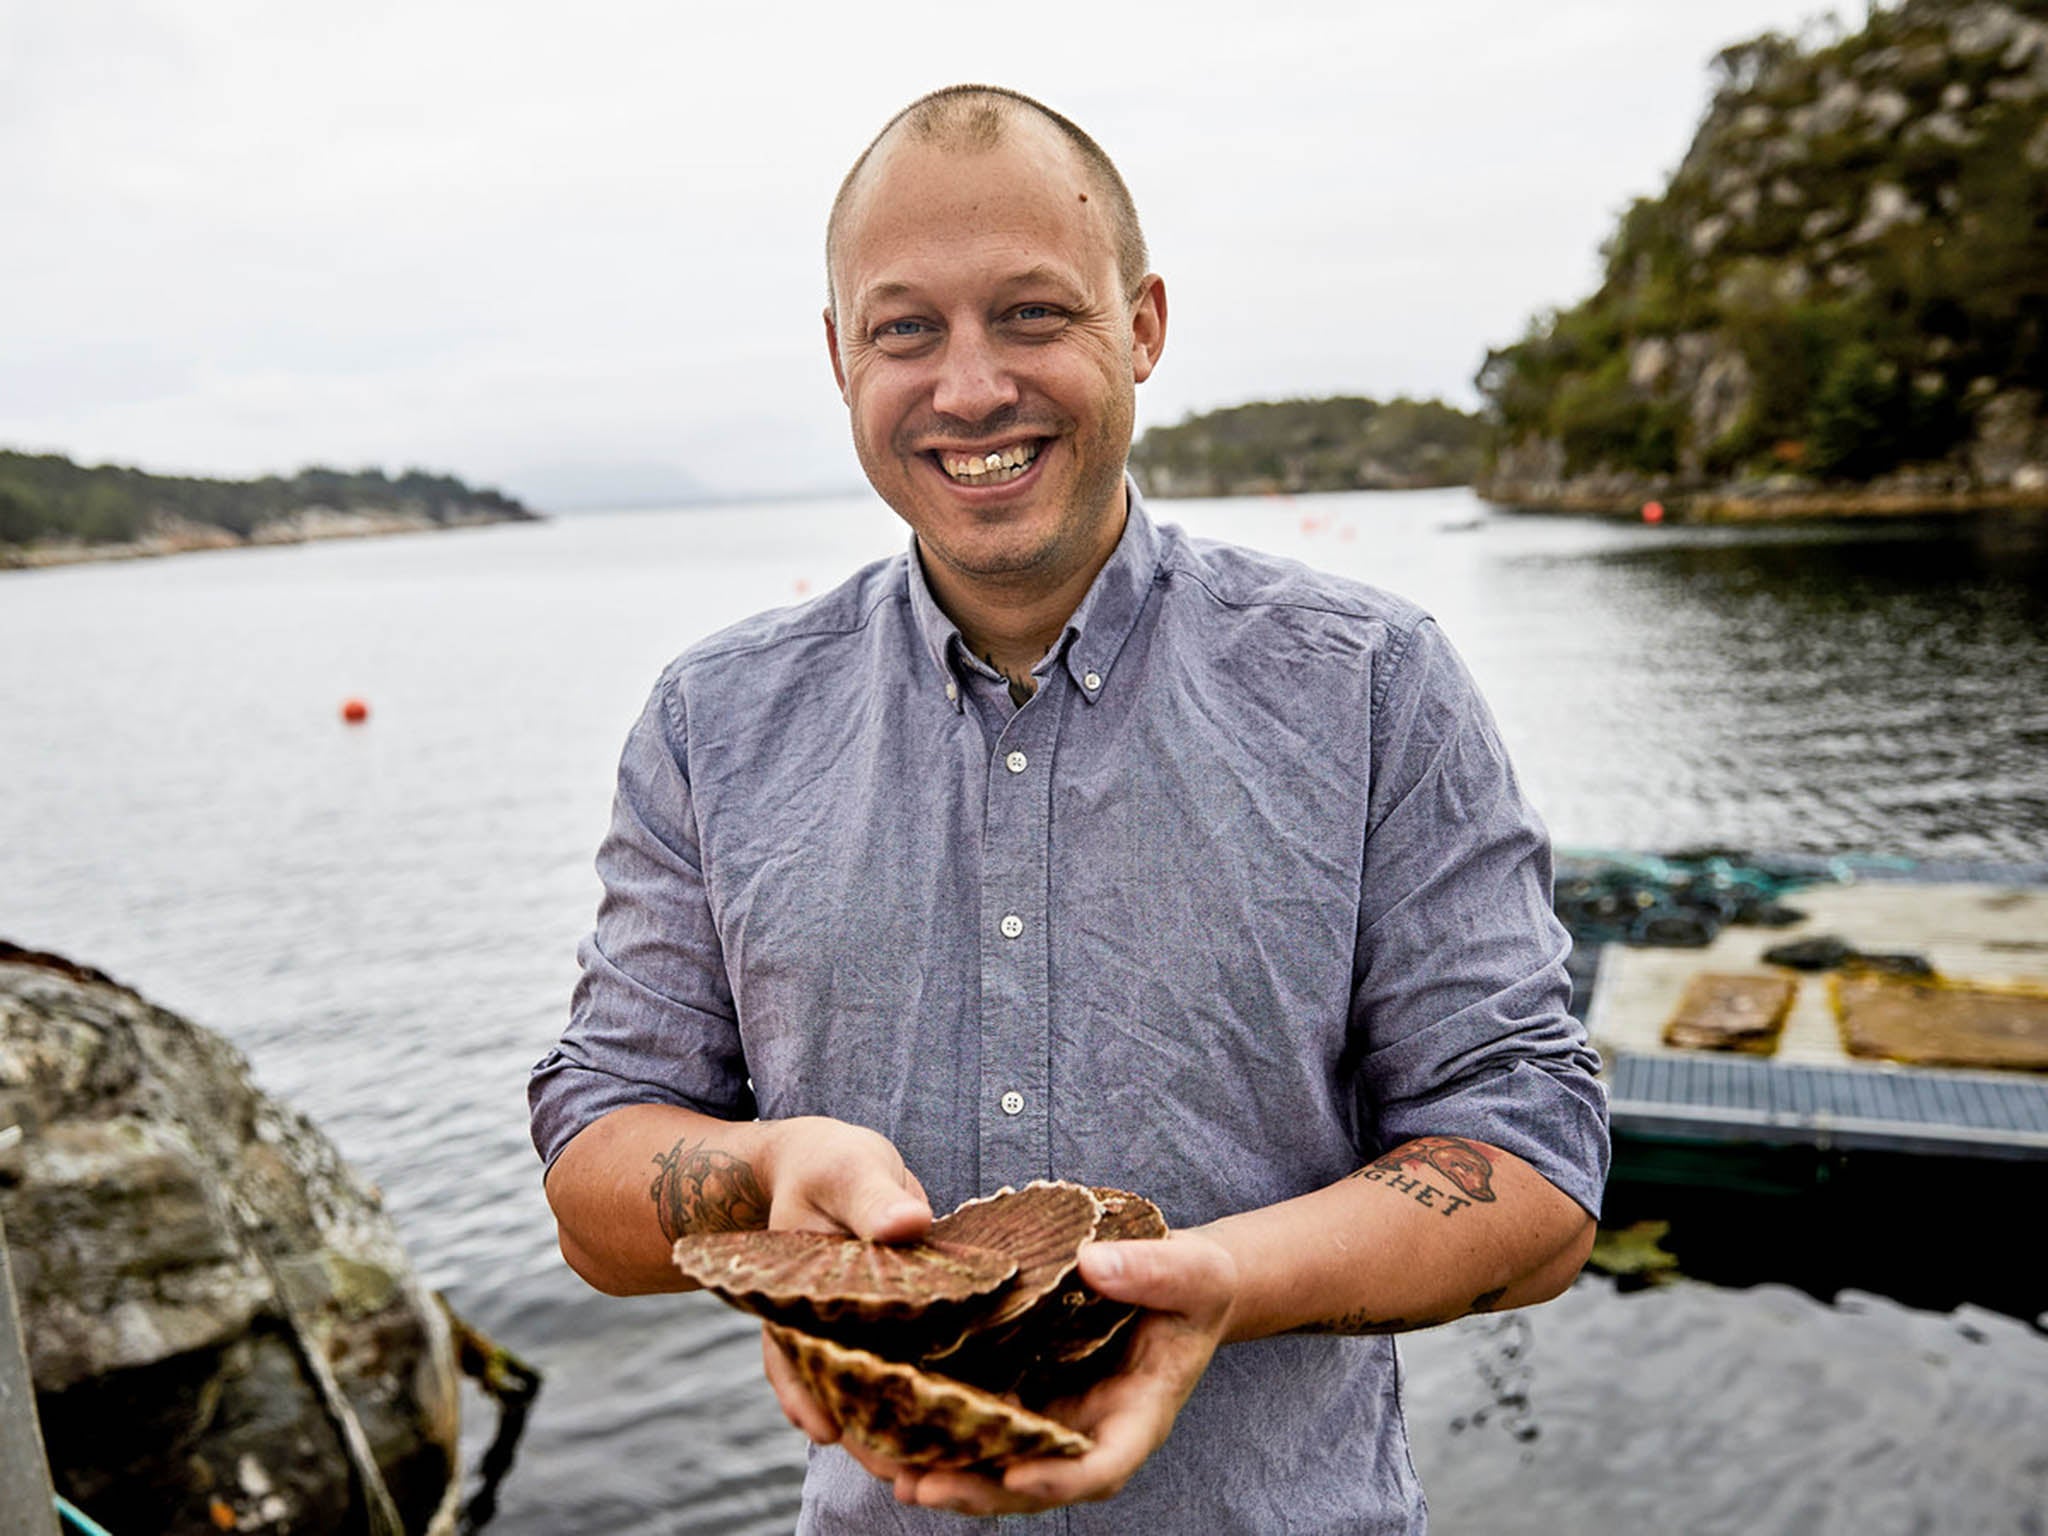 At his restaurant, Lysverket, in Bergen, Norway, chef Christopher Haatuft conveys everything he wants the food of Norway to be: nostalgic, sustainable, creative, delicious and witty.